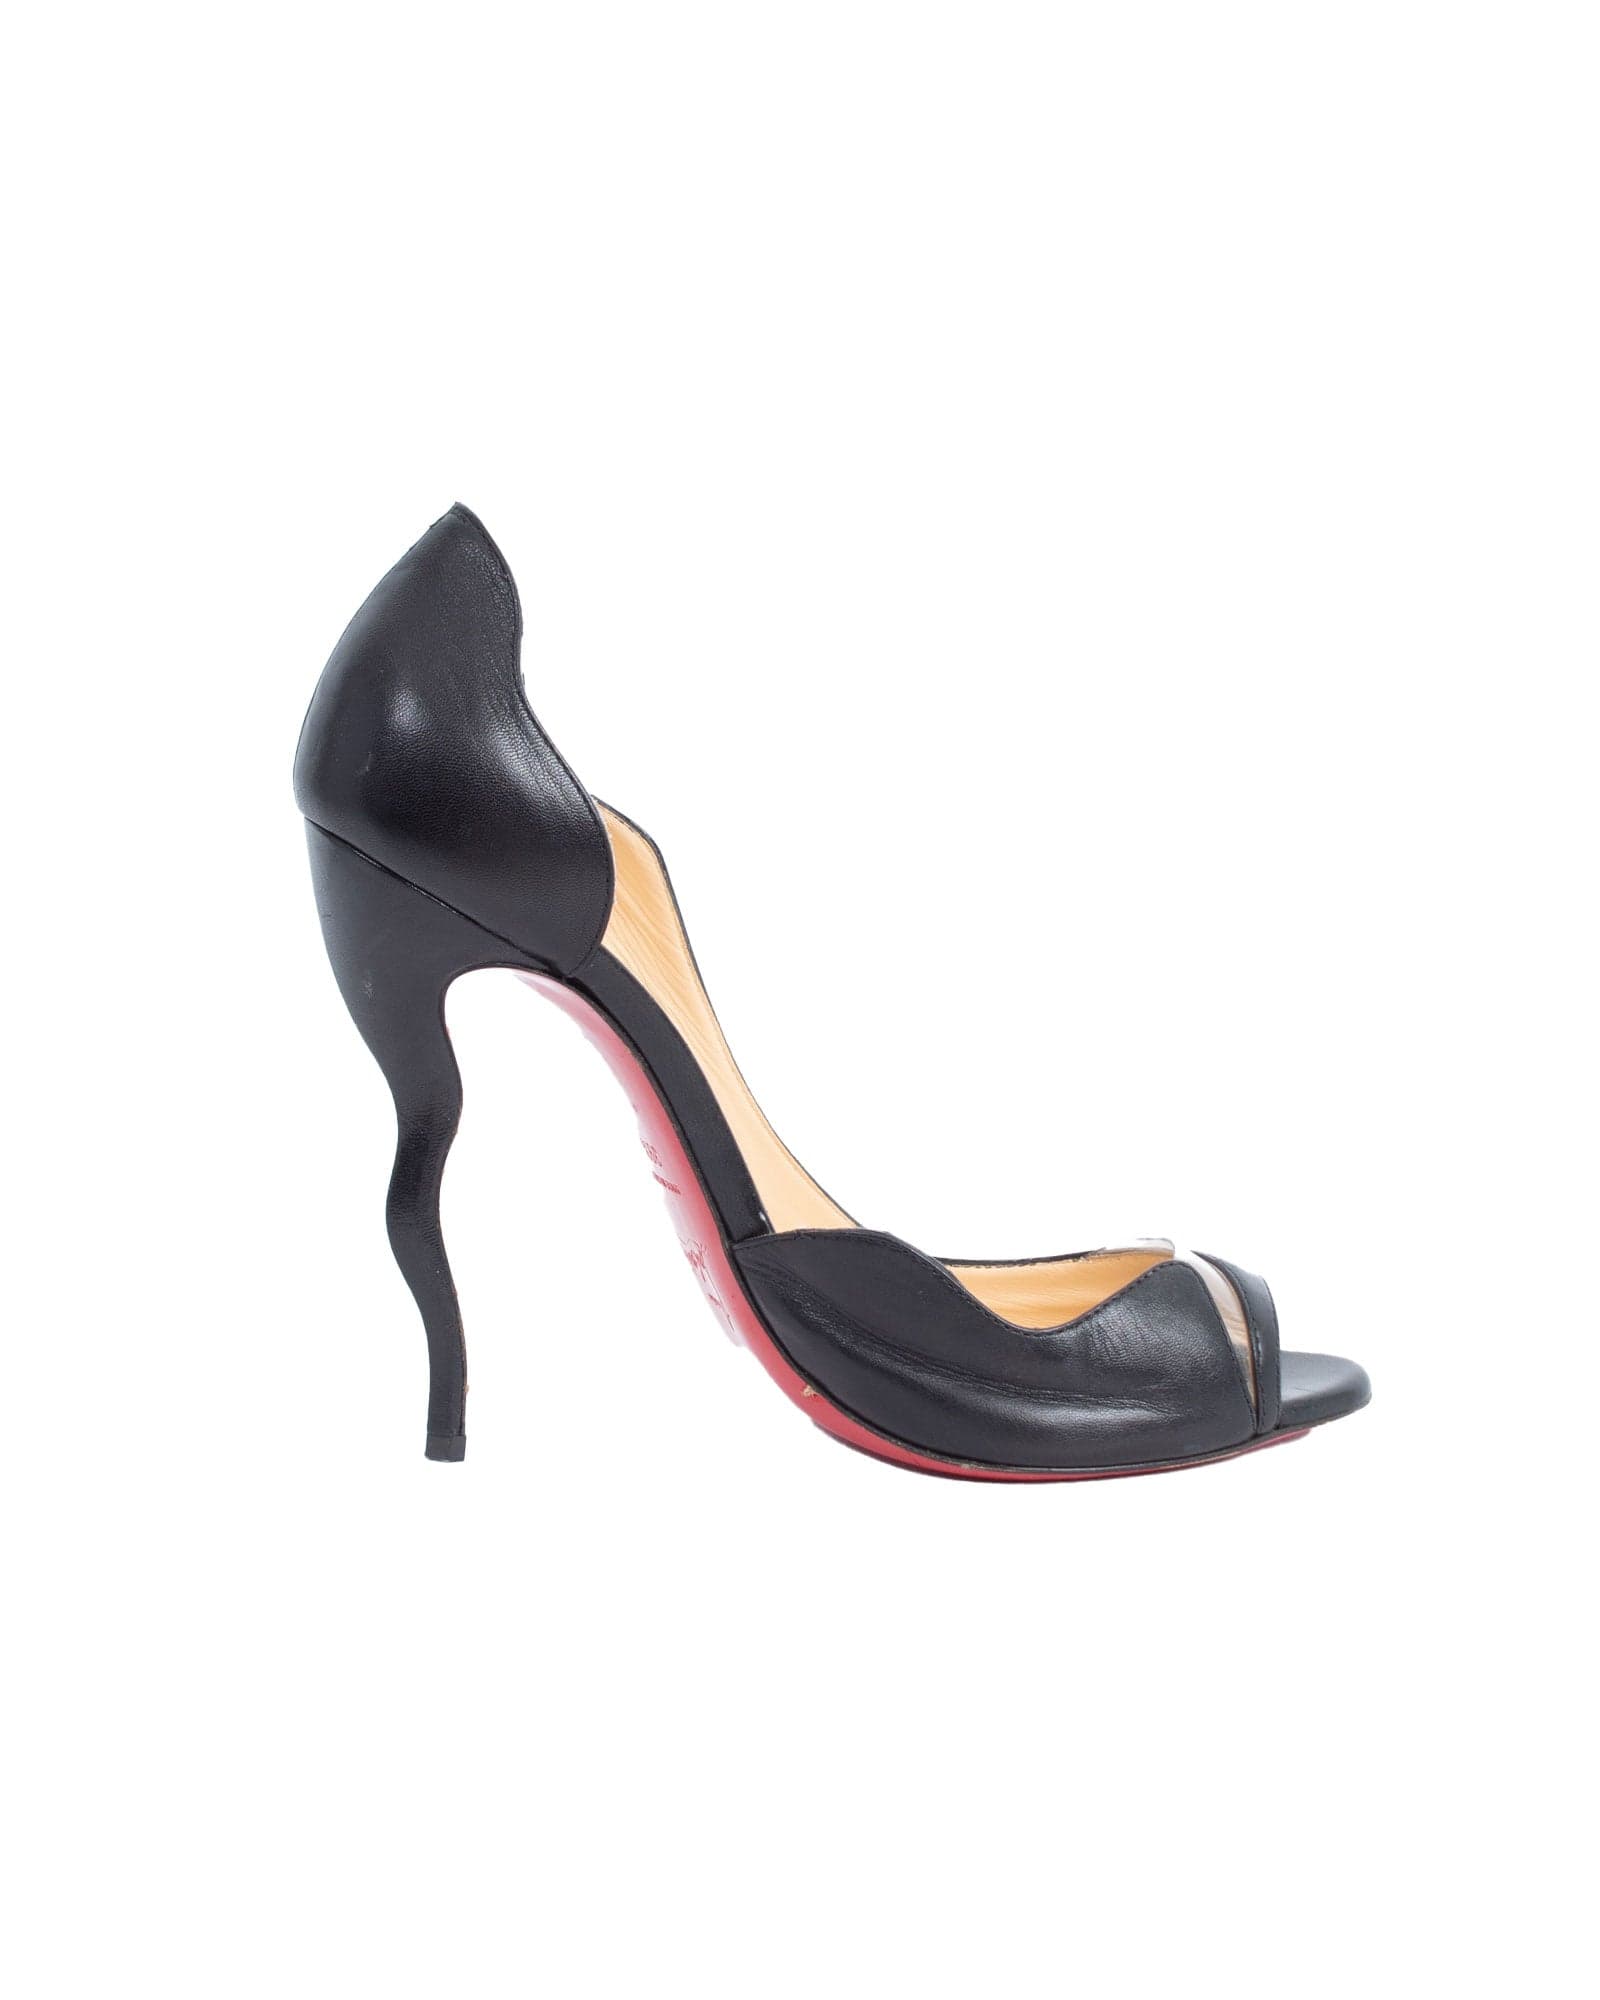 Christian Louboutin Authenticated Hot Chick Heel